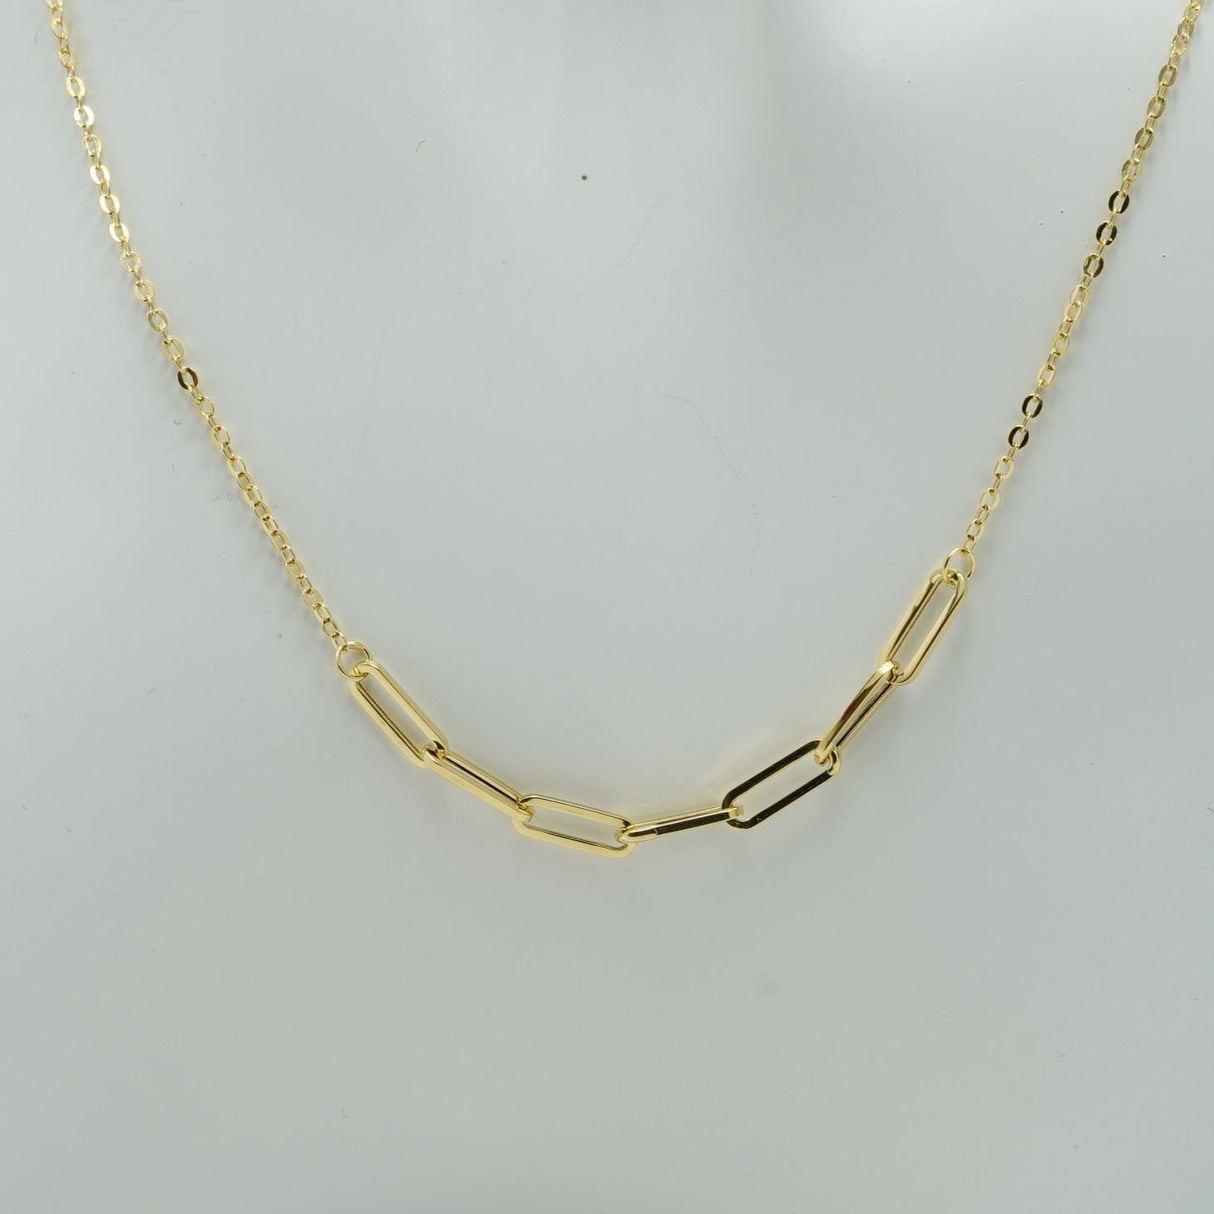 14K Gold Necklace, Double Paper Clip Adjustable Necklace, Paper Clip Shape Link Necklace,  Make a statement with this 14K gold necklace from Diamond Origin. Its unique double paper clip design and adjustable length make it a fashionable, yet wearable piece that works with any style. Rich and eye-catching, the real existing product will elevate any look. Gift it or keep it- this paper clip necklace is a stunning addition to your jewelry collection.